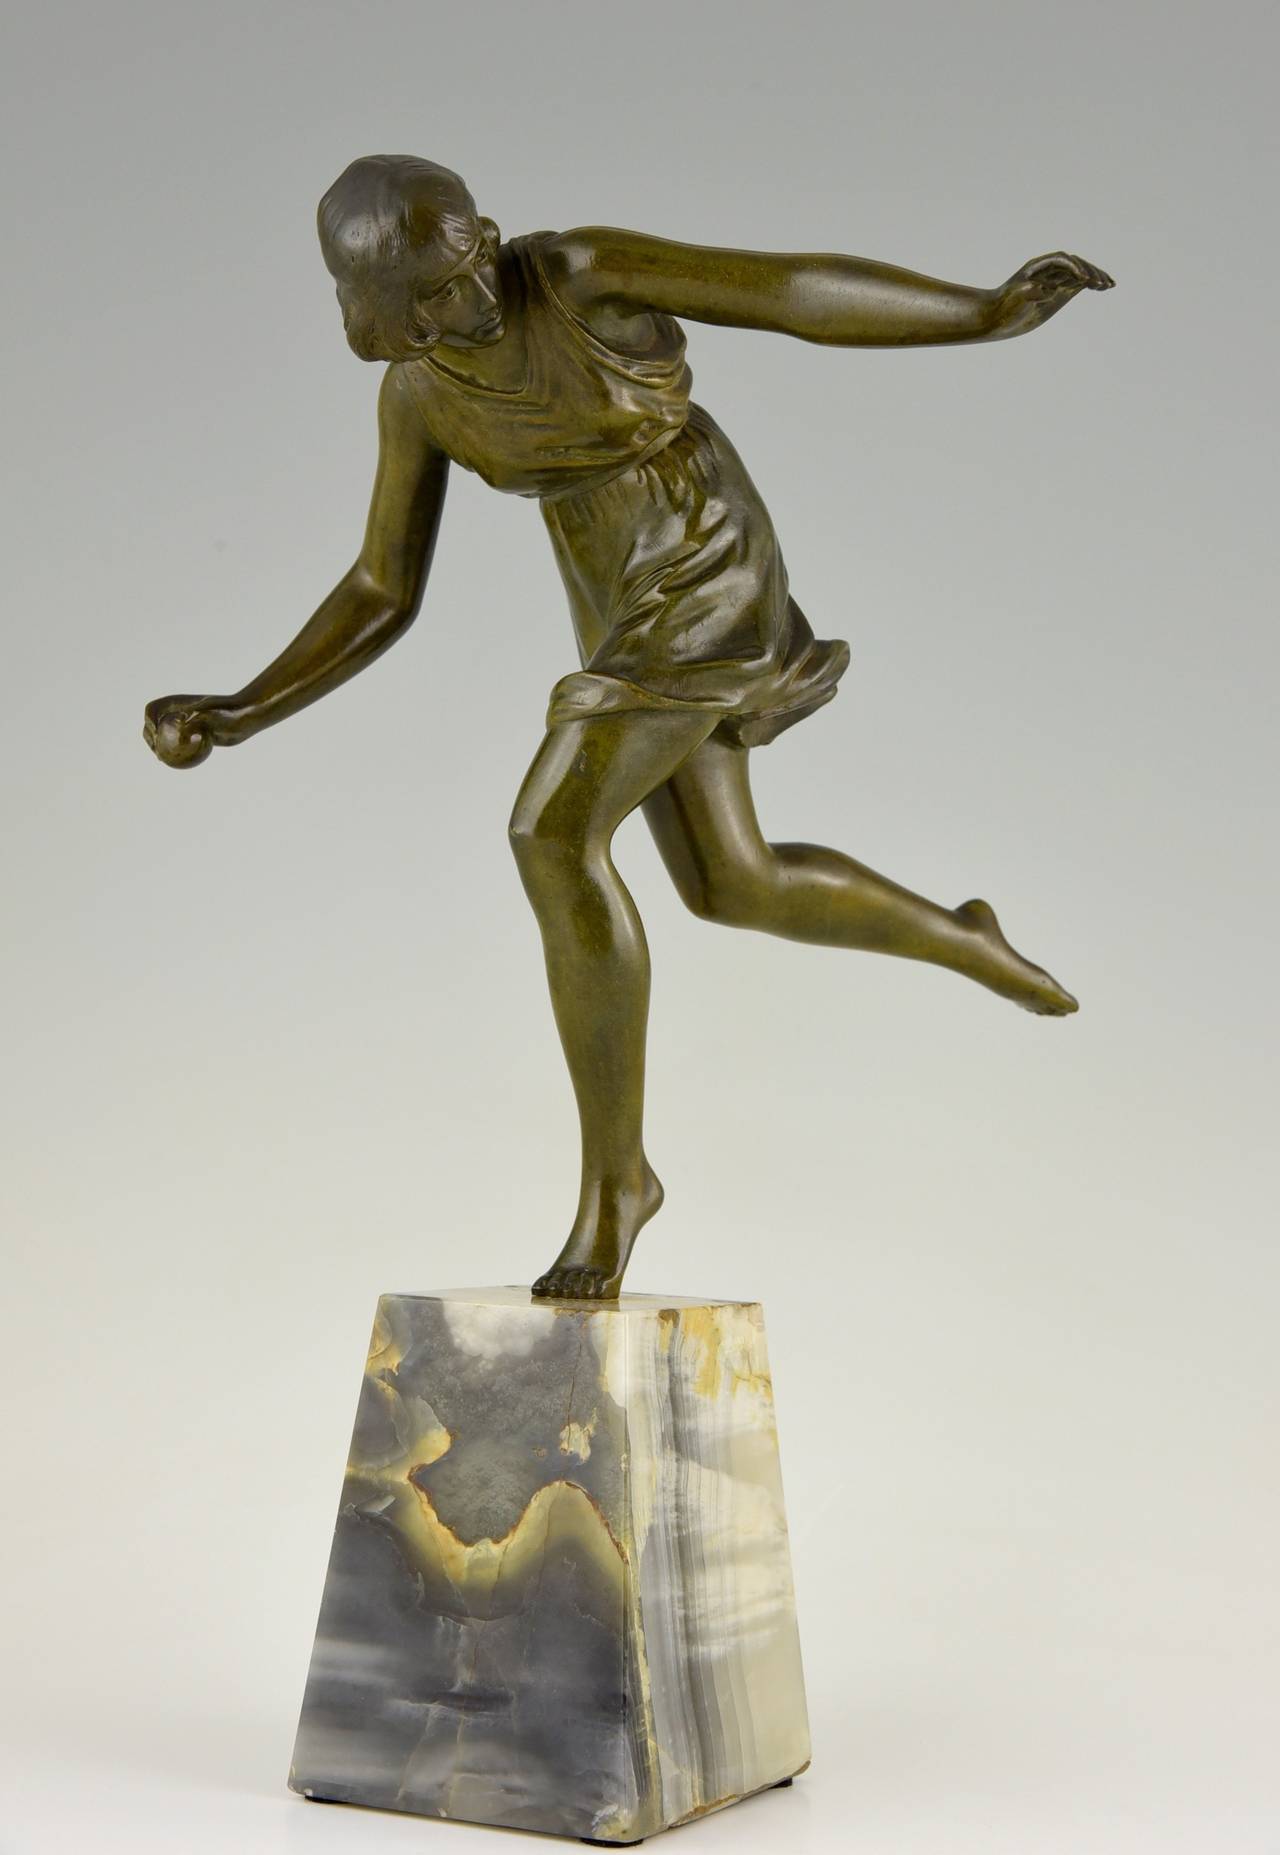 Title:  Atalanta.
Description: A bronze Art Deco figure of a girl throwing a ball on a marble base.
Artist/ Maker: Pierre  Le Faguays, 
Signature/ Marks:  Le Faguays.
Style: Art Deco.
Condition:  Good original condition.
Date: